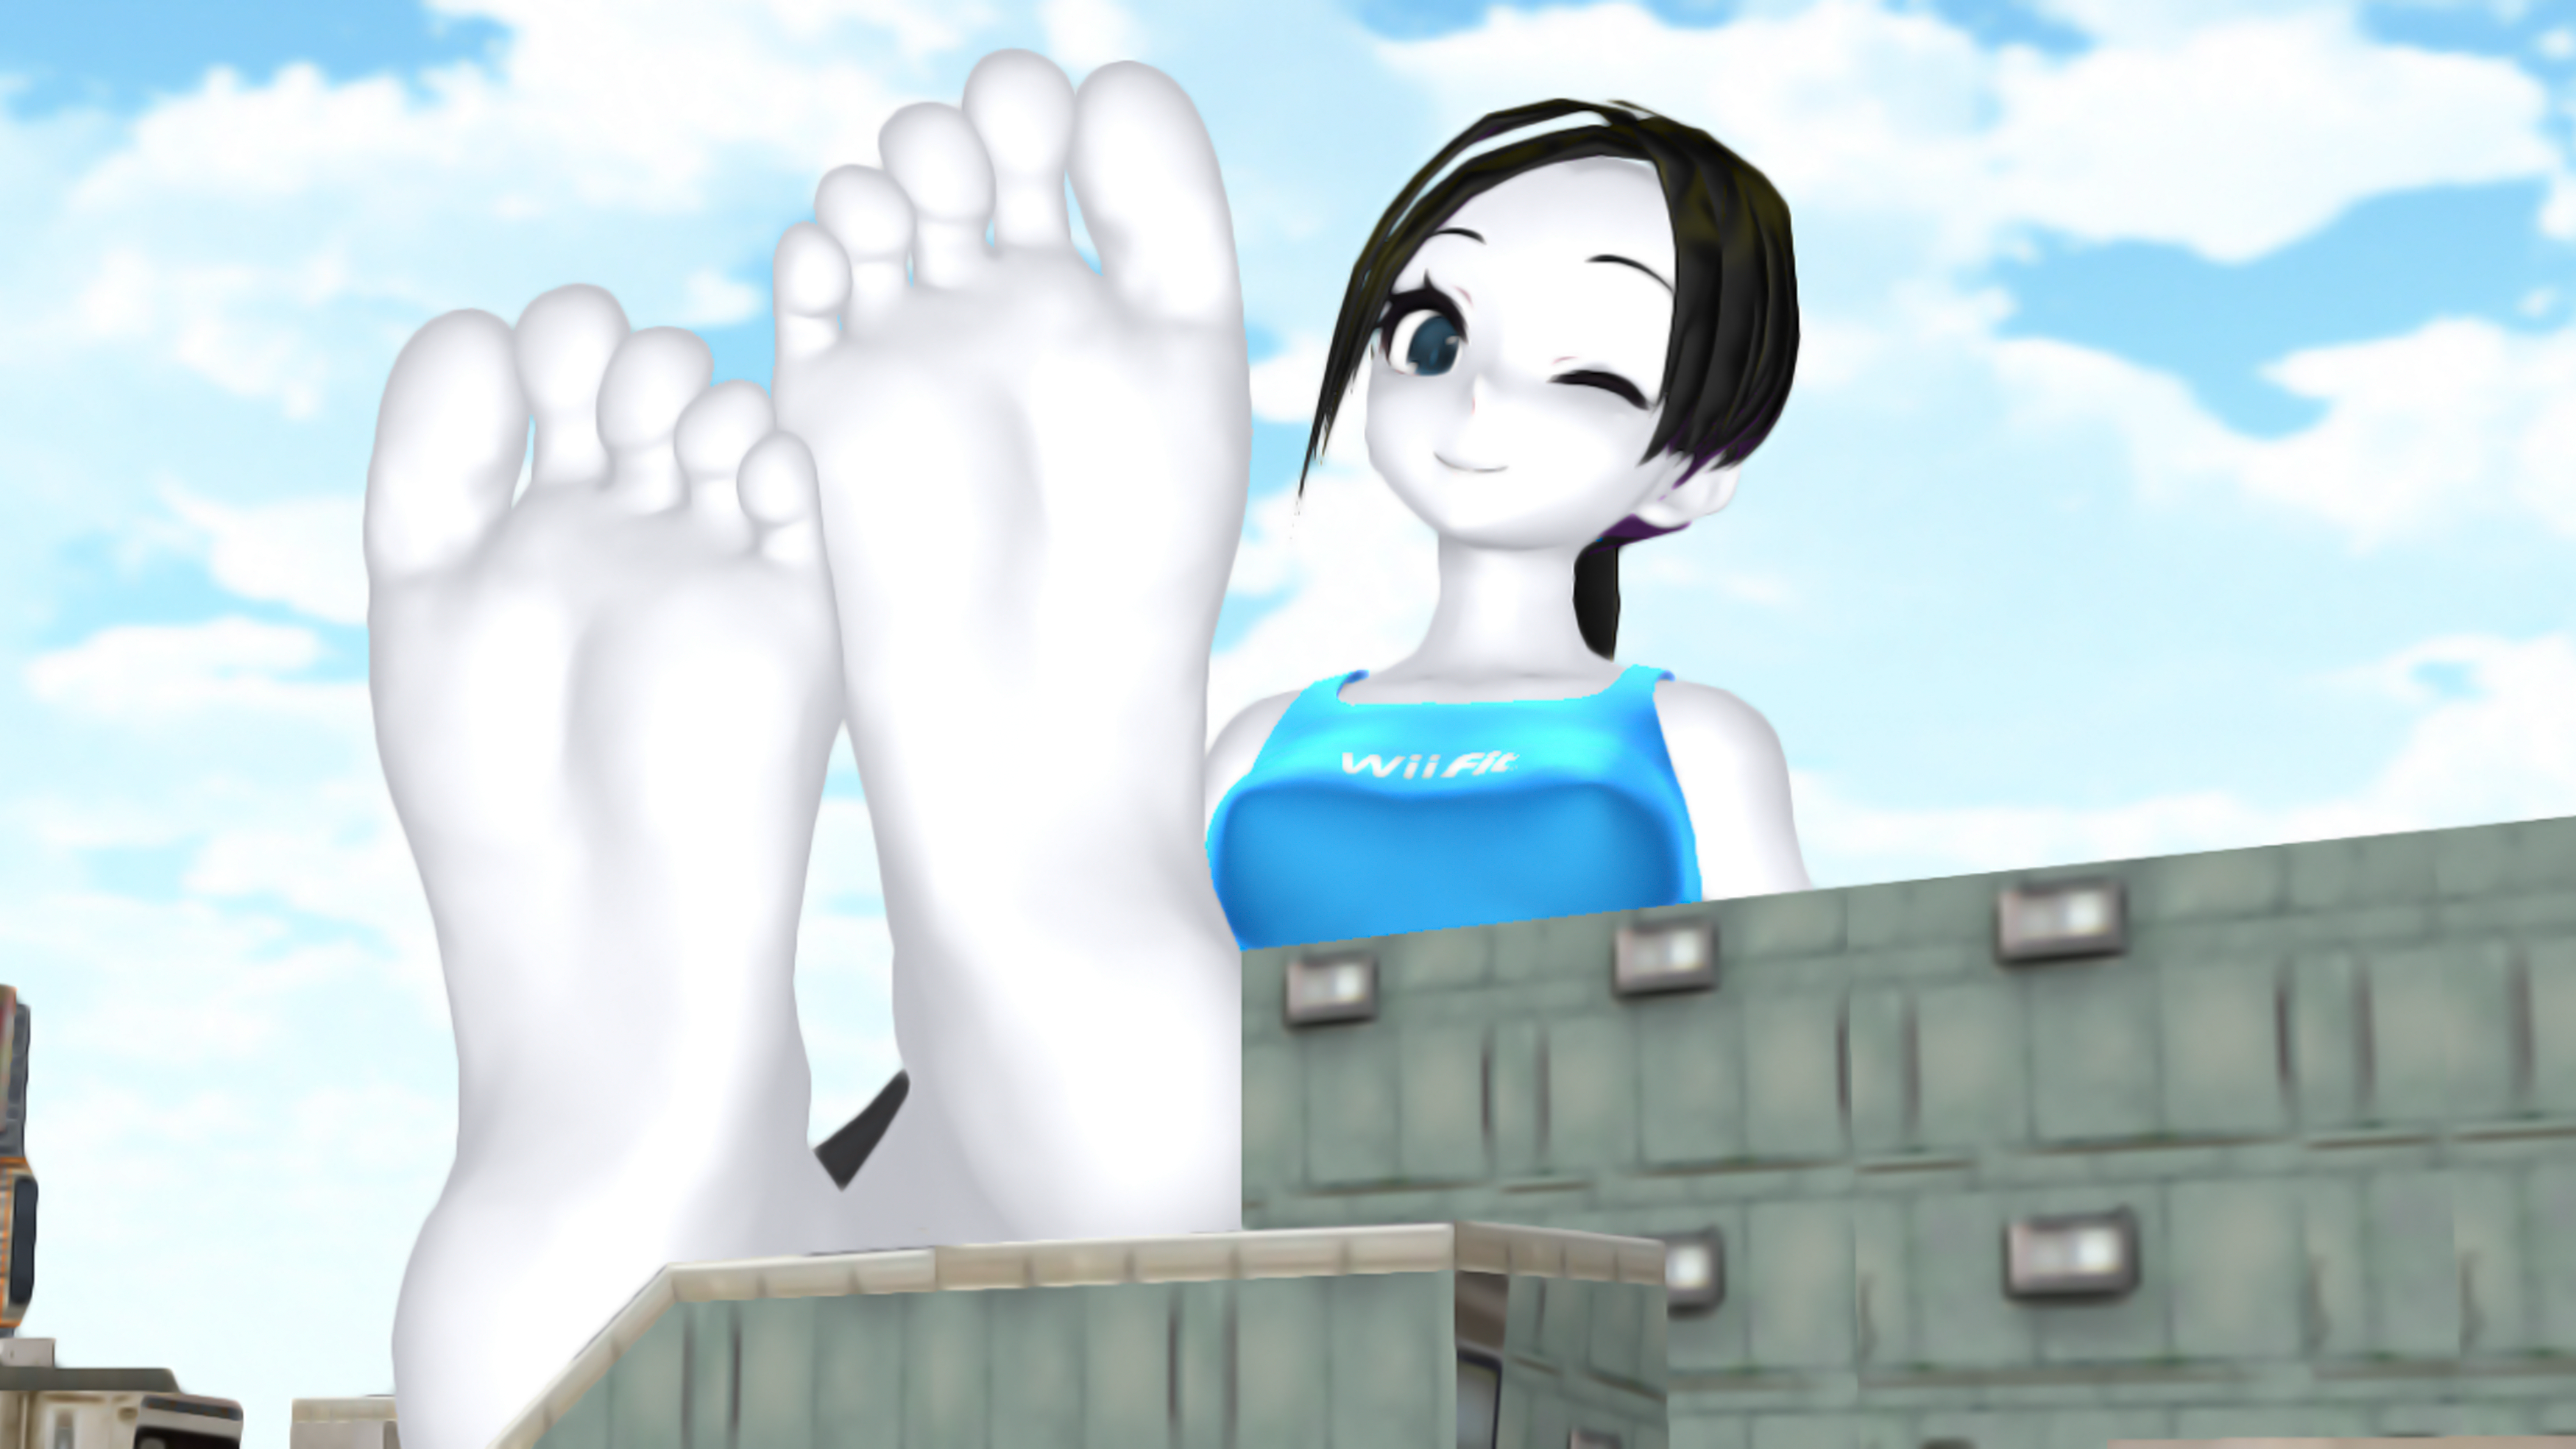 Giantess vr. Великанша Wii Fit. Wii Fit Trainer 34 giant Vore. Wii Fit feet. Wii Fit Trainer 34.